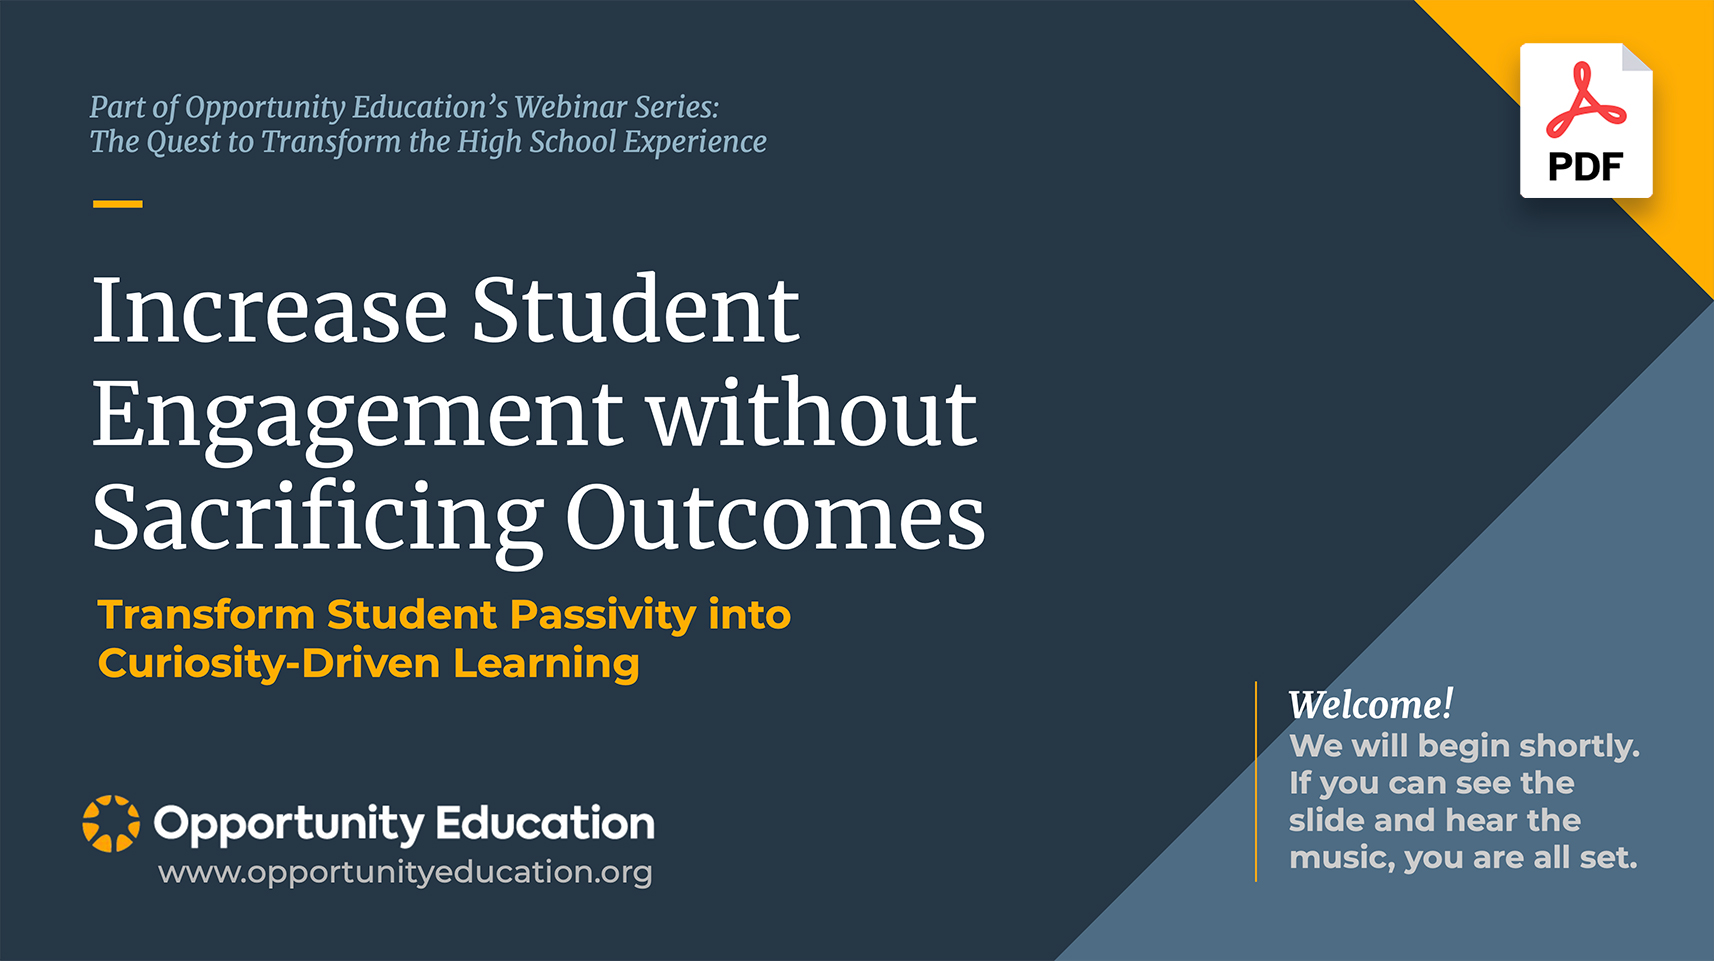 The cover of the slide deck for Opportunity Education's webinar, "Increase Student Engagement Without Sacrificing Outcomes."